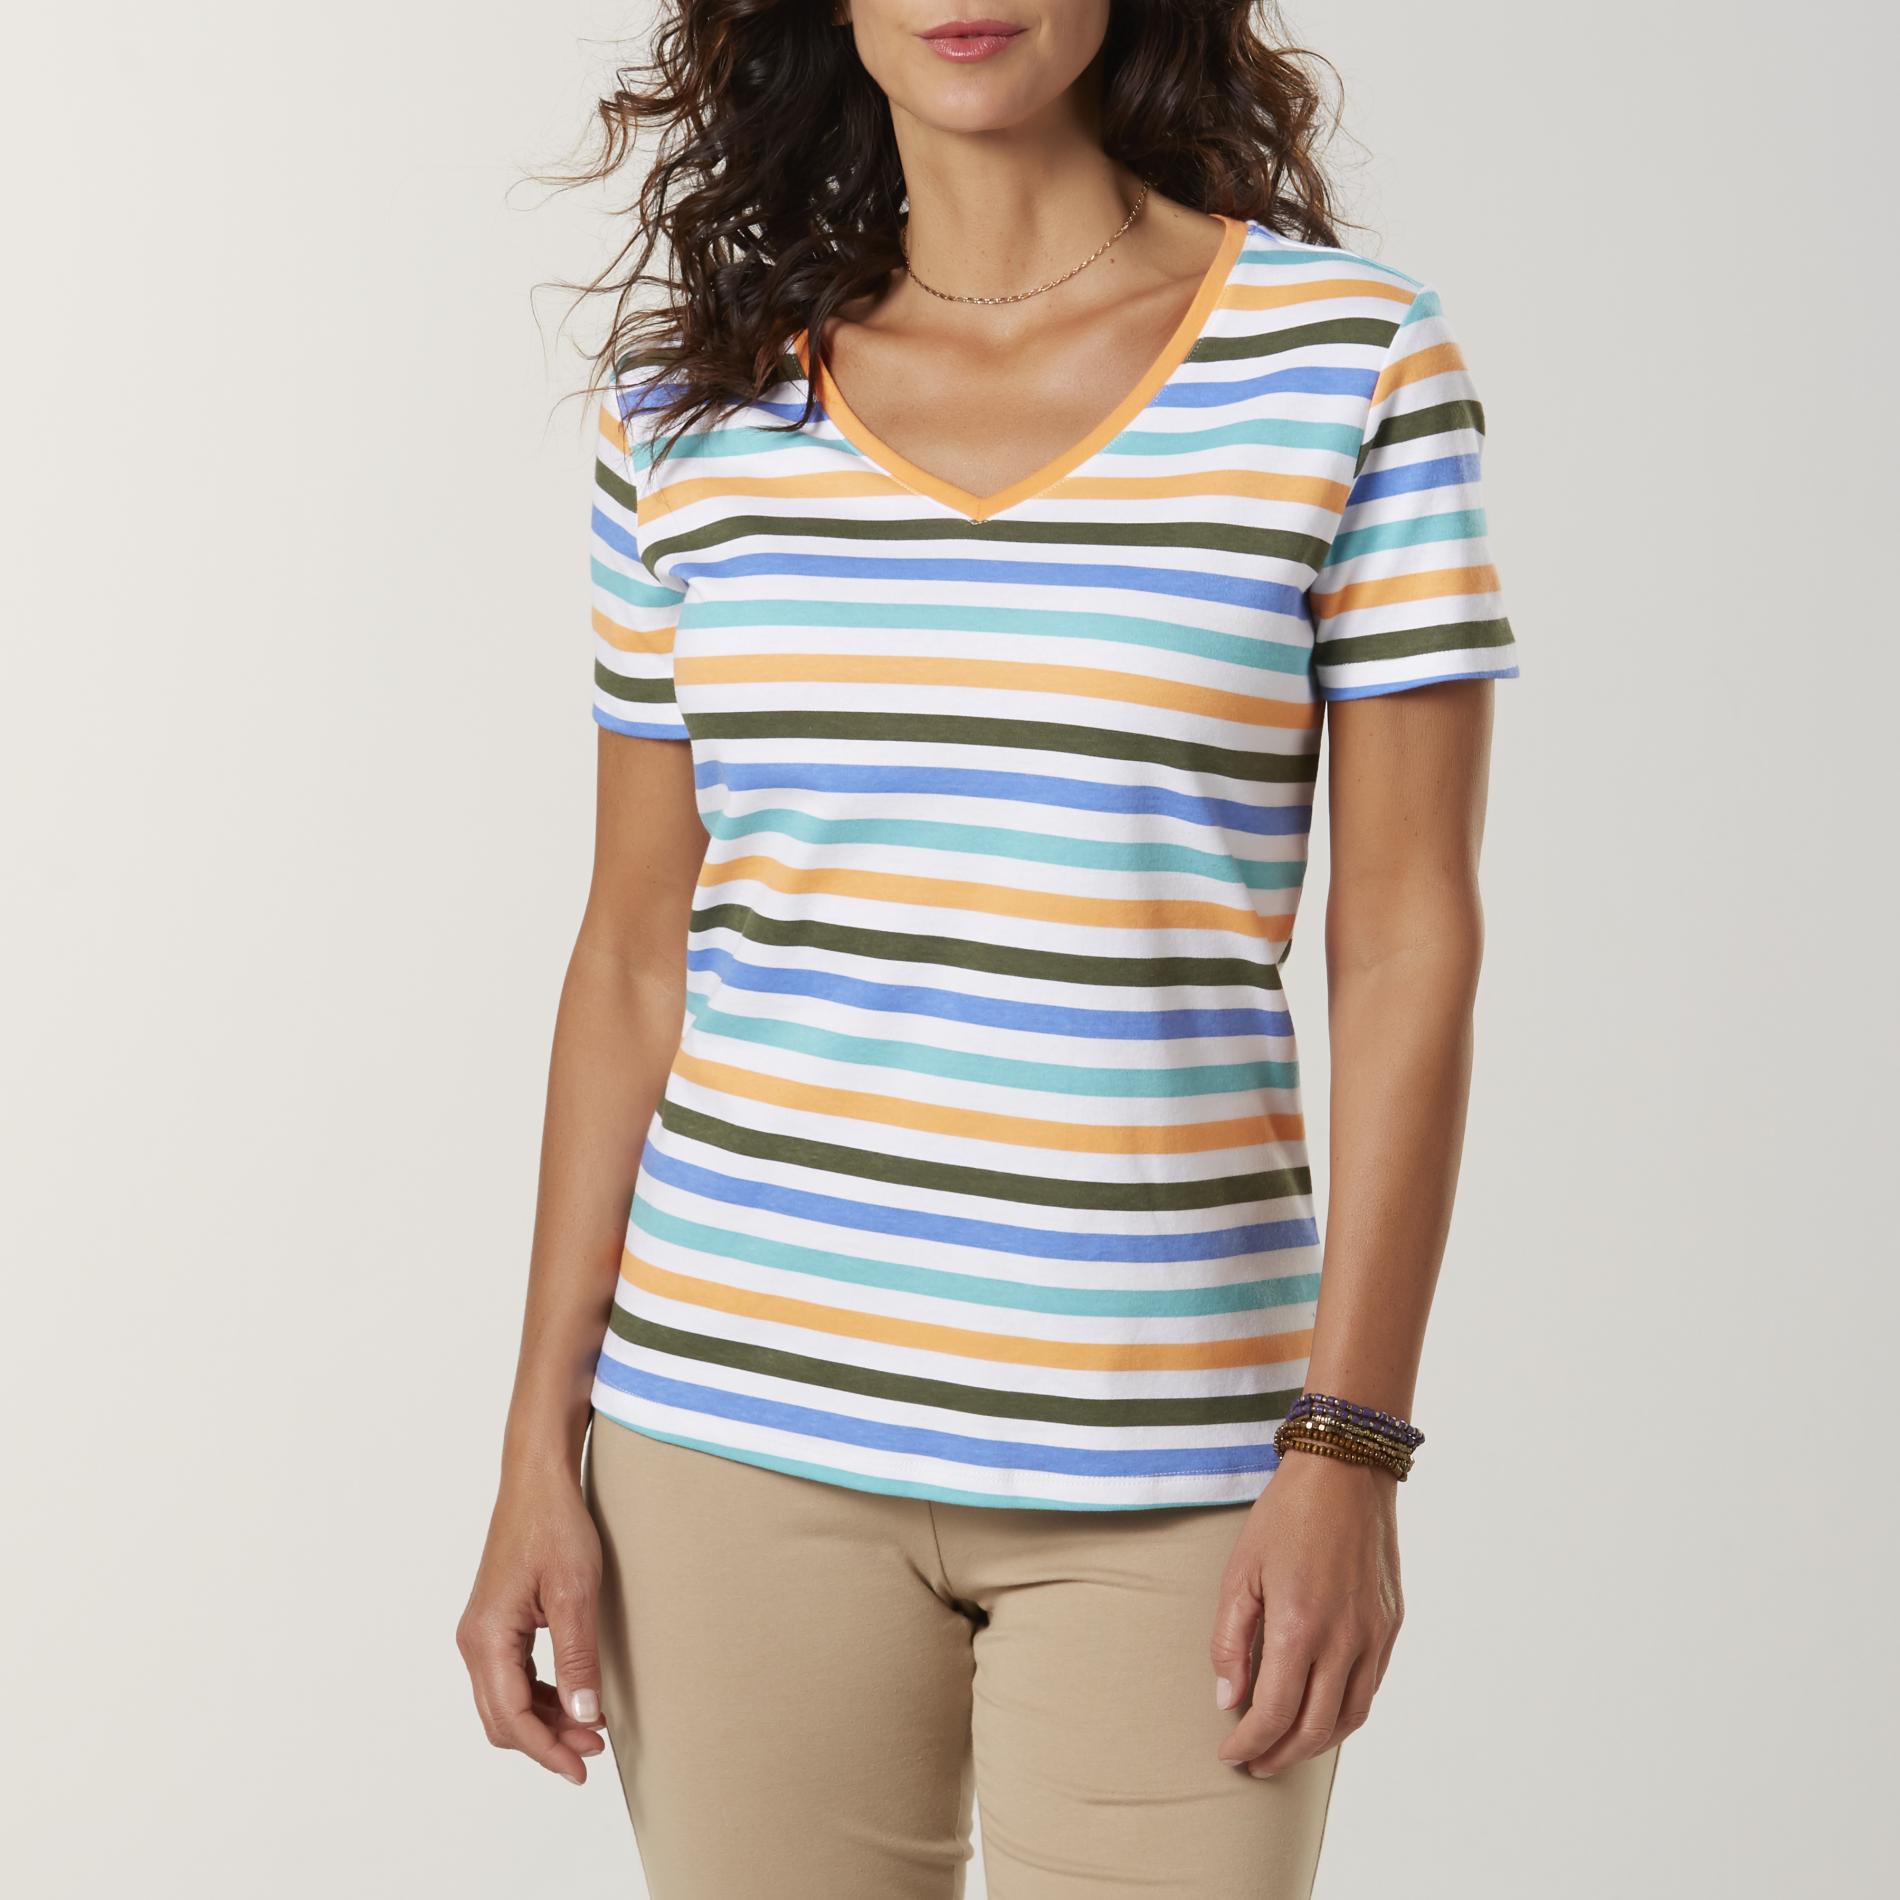 Basic Editions Women's Relaxed Fit V-Neck Top - Striped